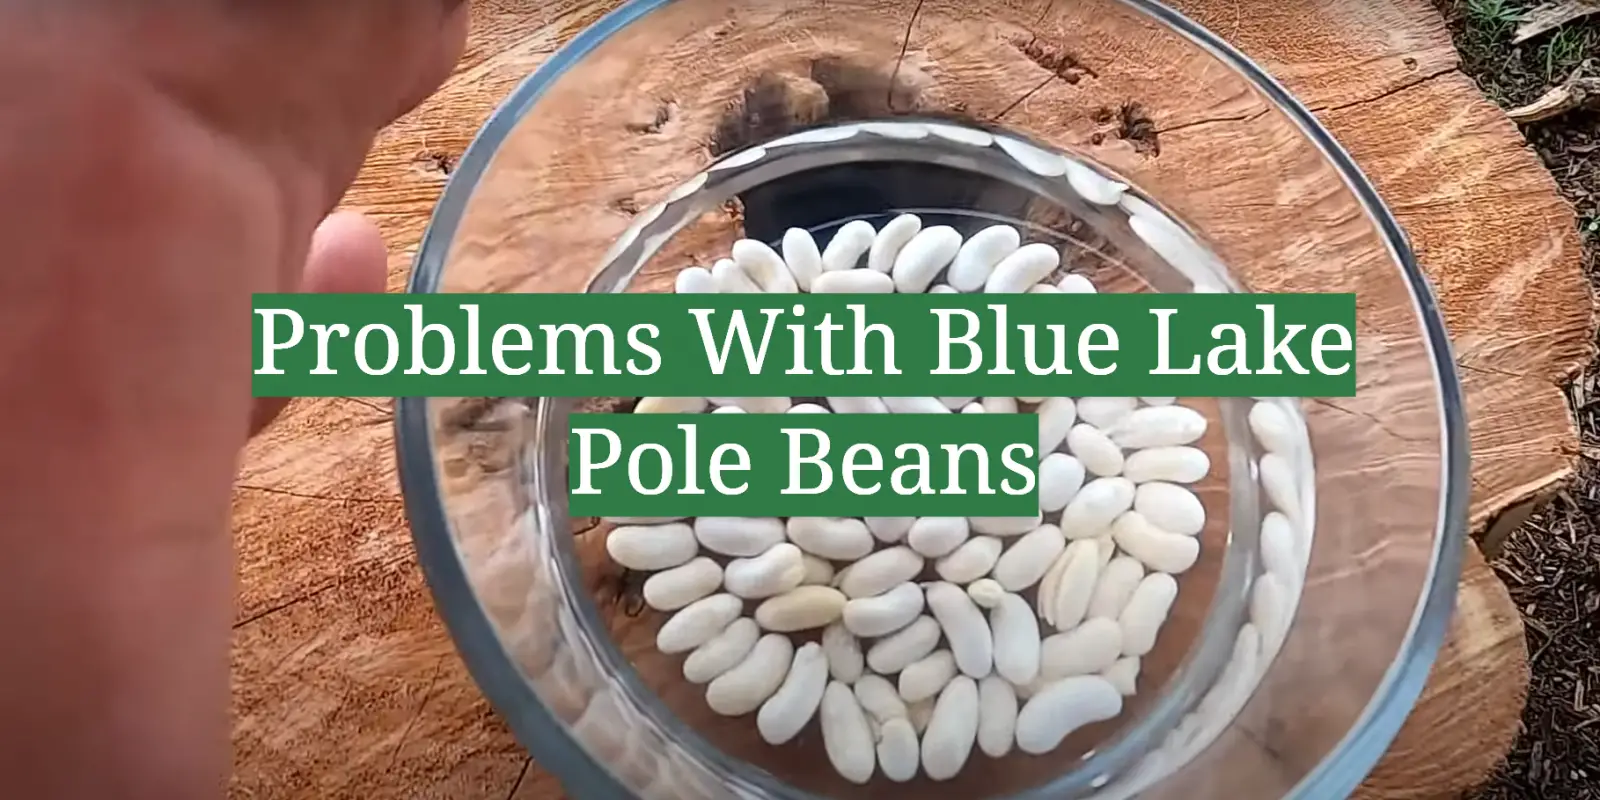 Problems With Blue Lake Pole Beans